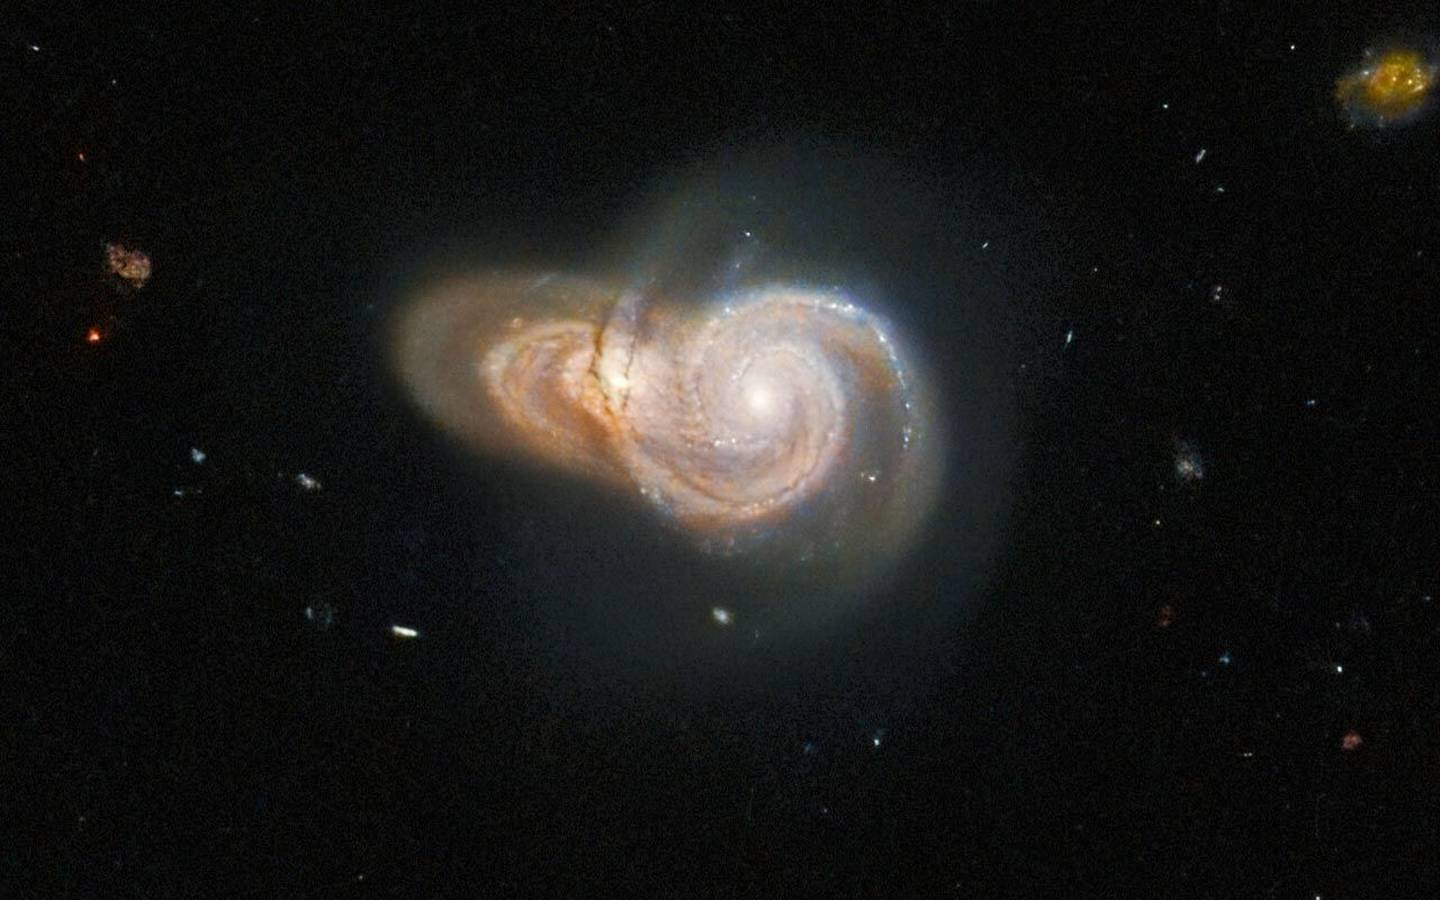 Overlapping galaxies with possible collision past detected by the Hubble telescope